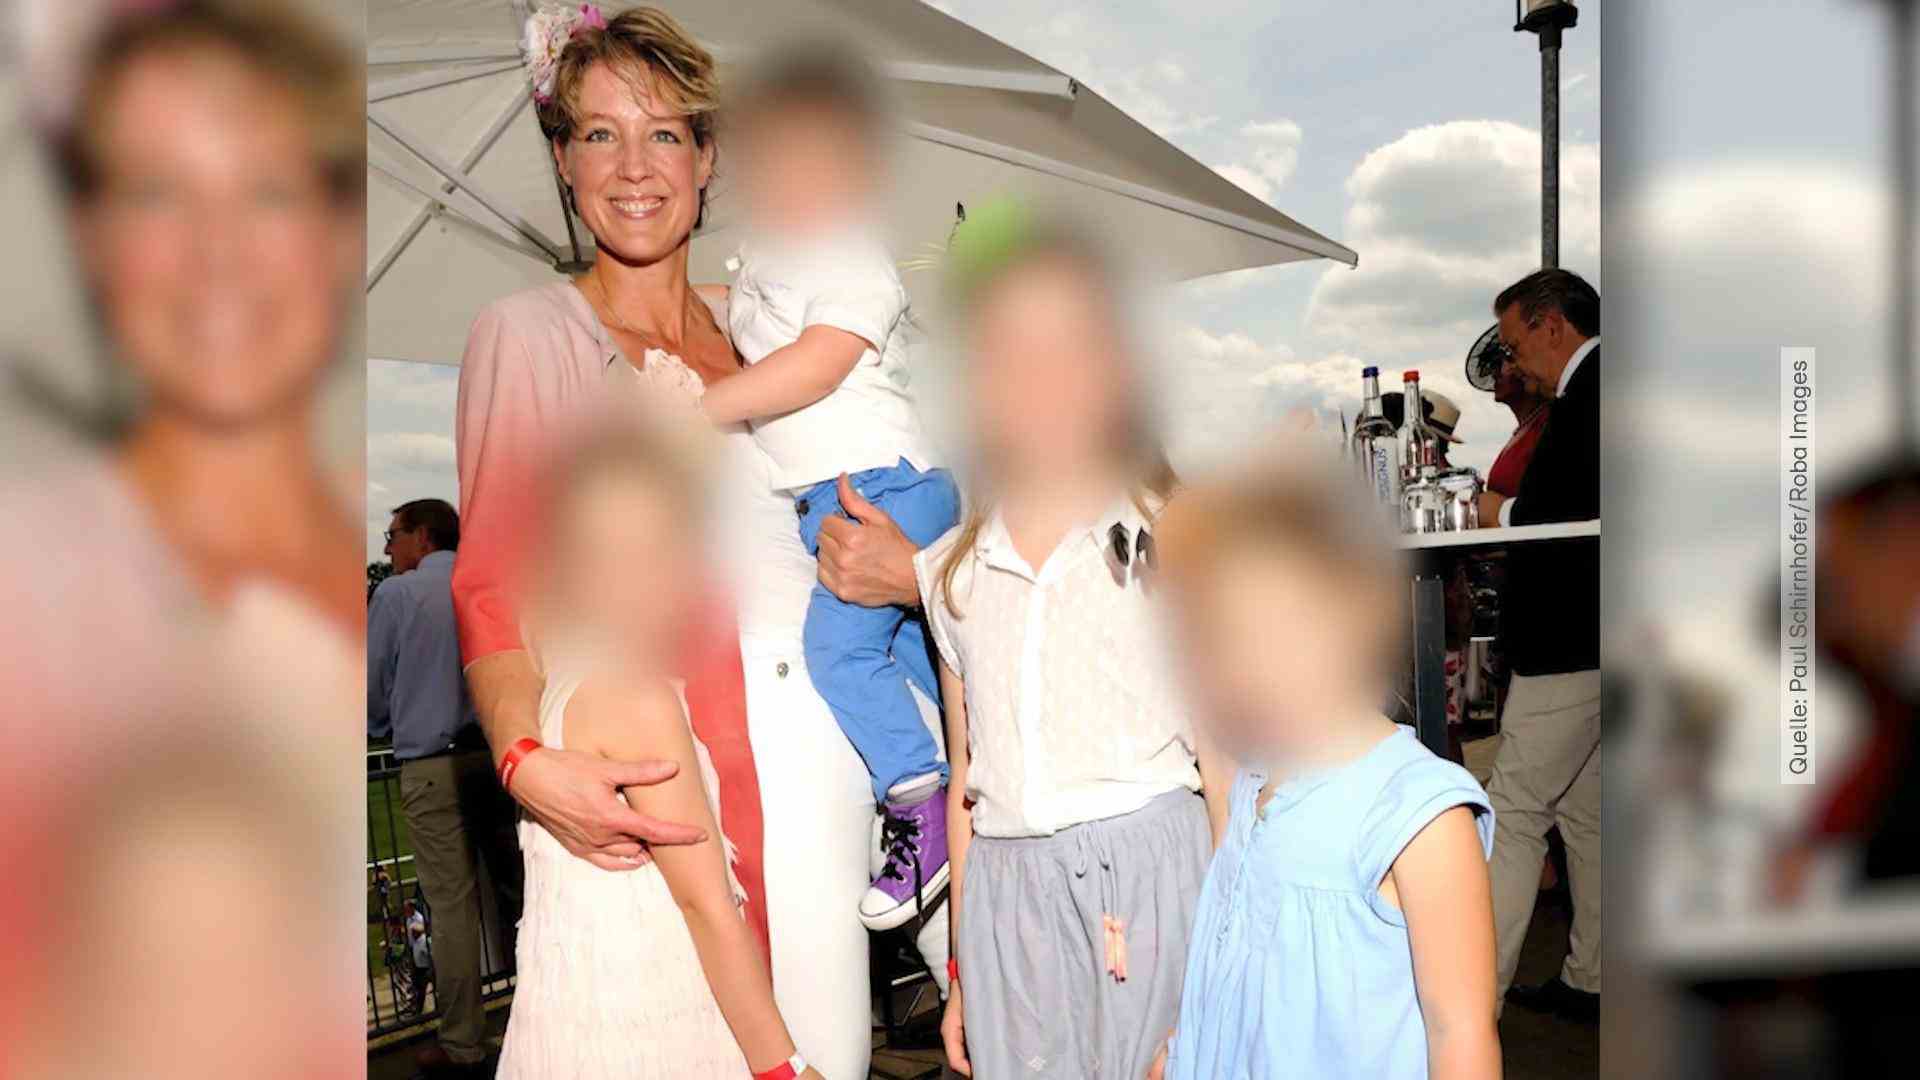 Christina Block fears for her kidnapped children: 